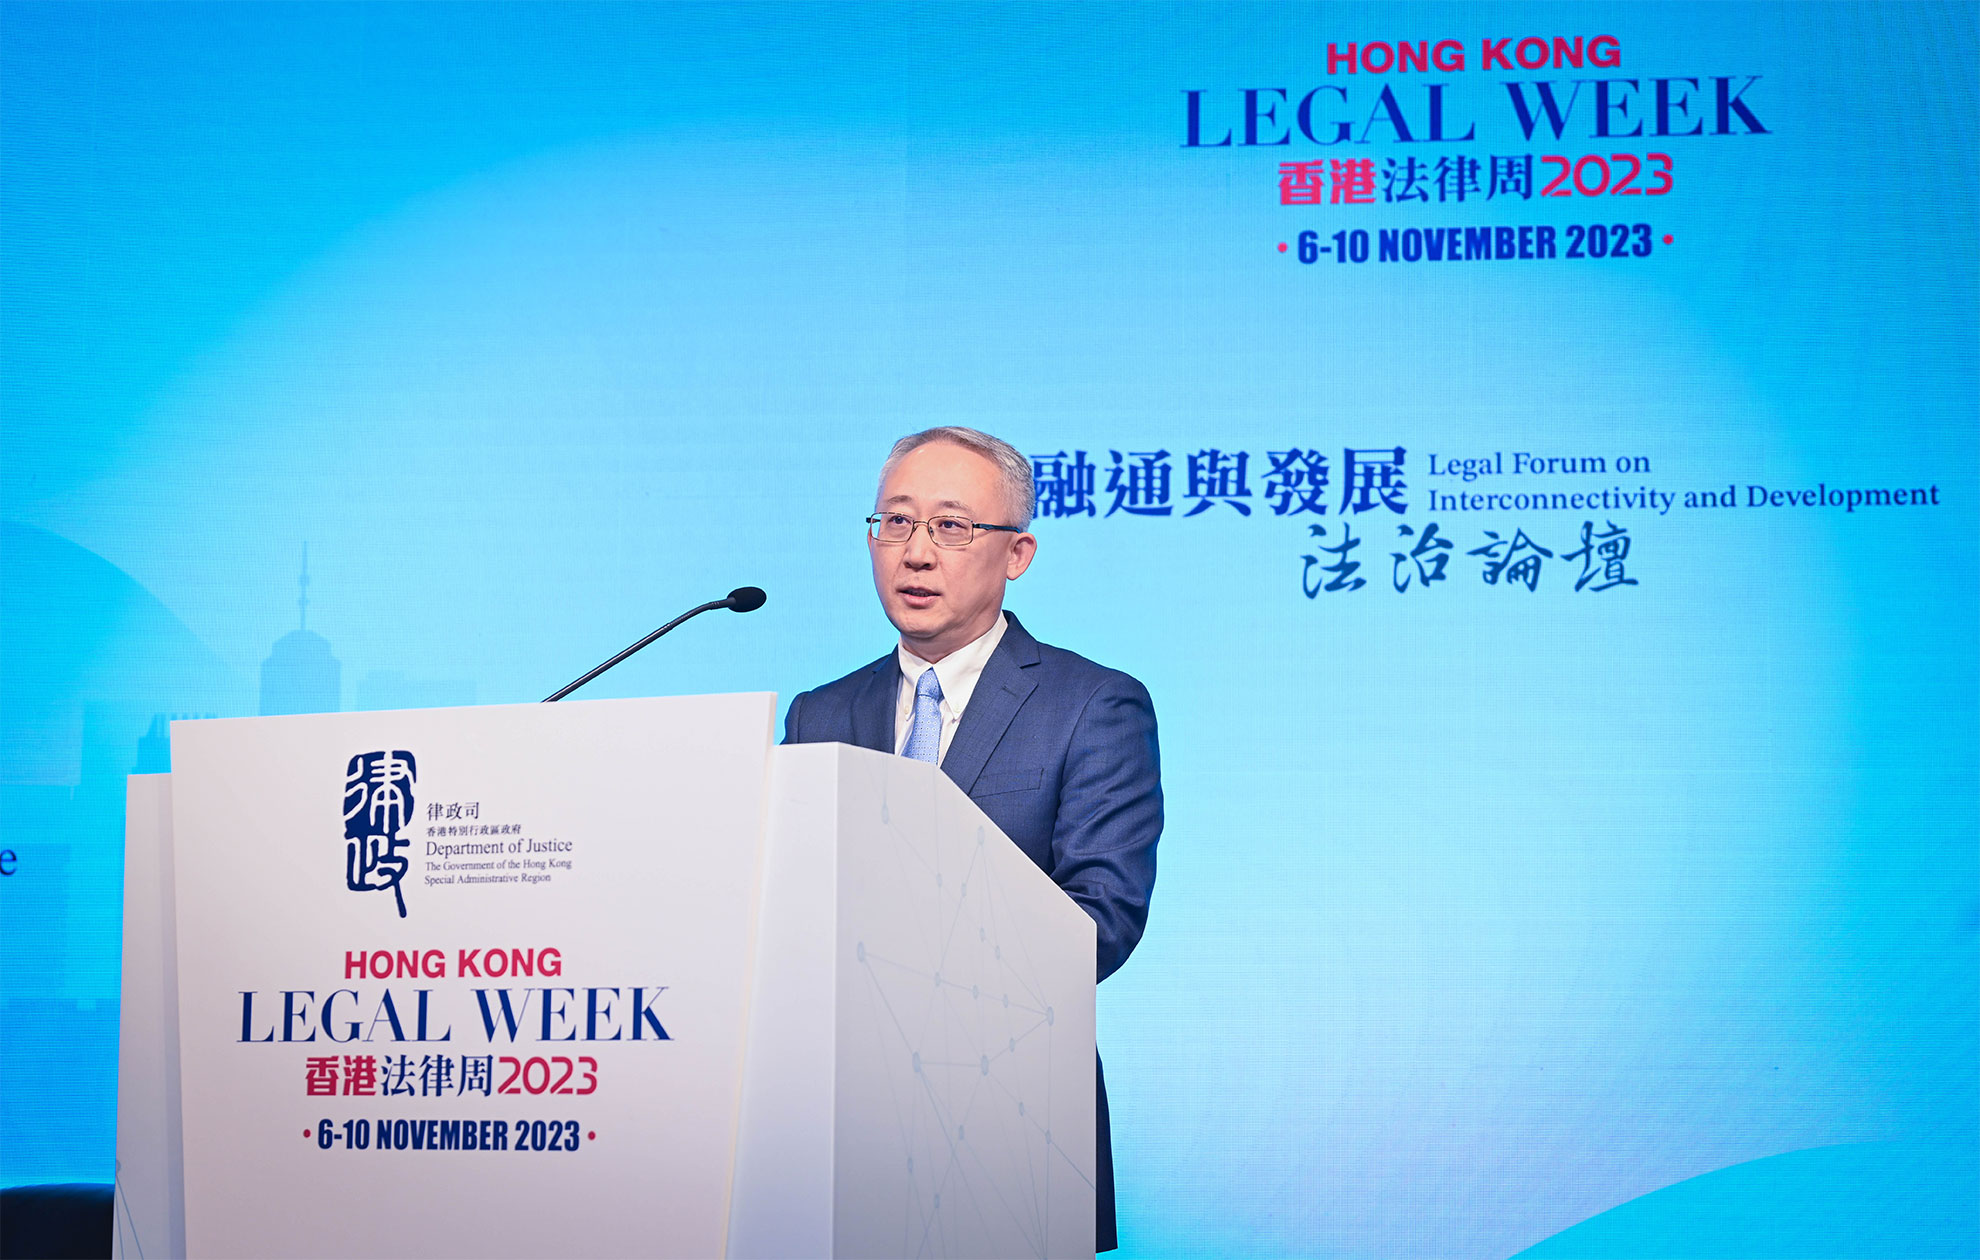 As part of the Hong Kong Legal Week 2023, the Legal Forum on Interconnectivity and Development co-organised by the Office of the Commissioner of the Ministry of Foreign Affairs in the Hong Kong Special Administrative Region and the Department of Justice was held successfully today (November 7). Photo shows the Acting Commissioner of the Office of the Commissioner of the Ministry of Foreign Affairs of the People's Republic of China in the Hong Kong Special Administrative Region, Mr Li Yongsheng, delivering his welcome remarks.